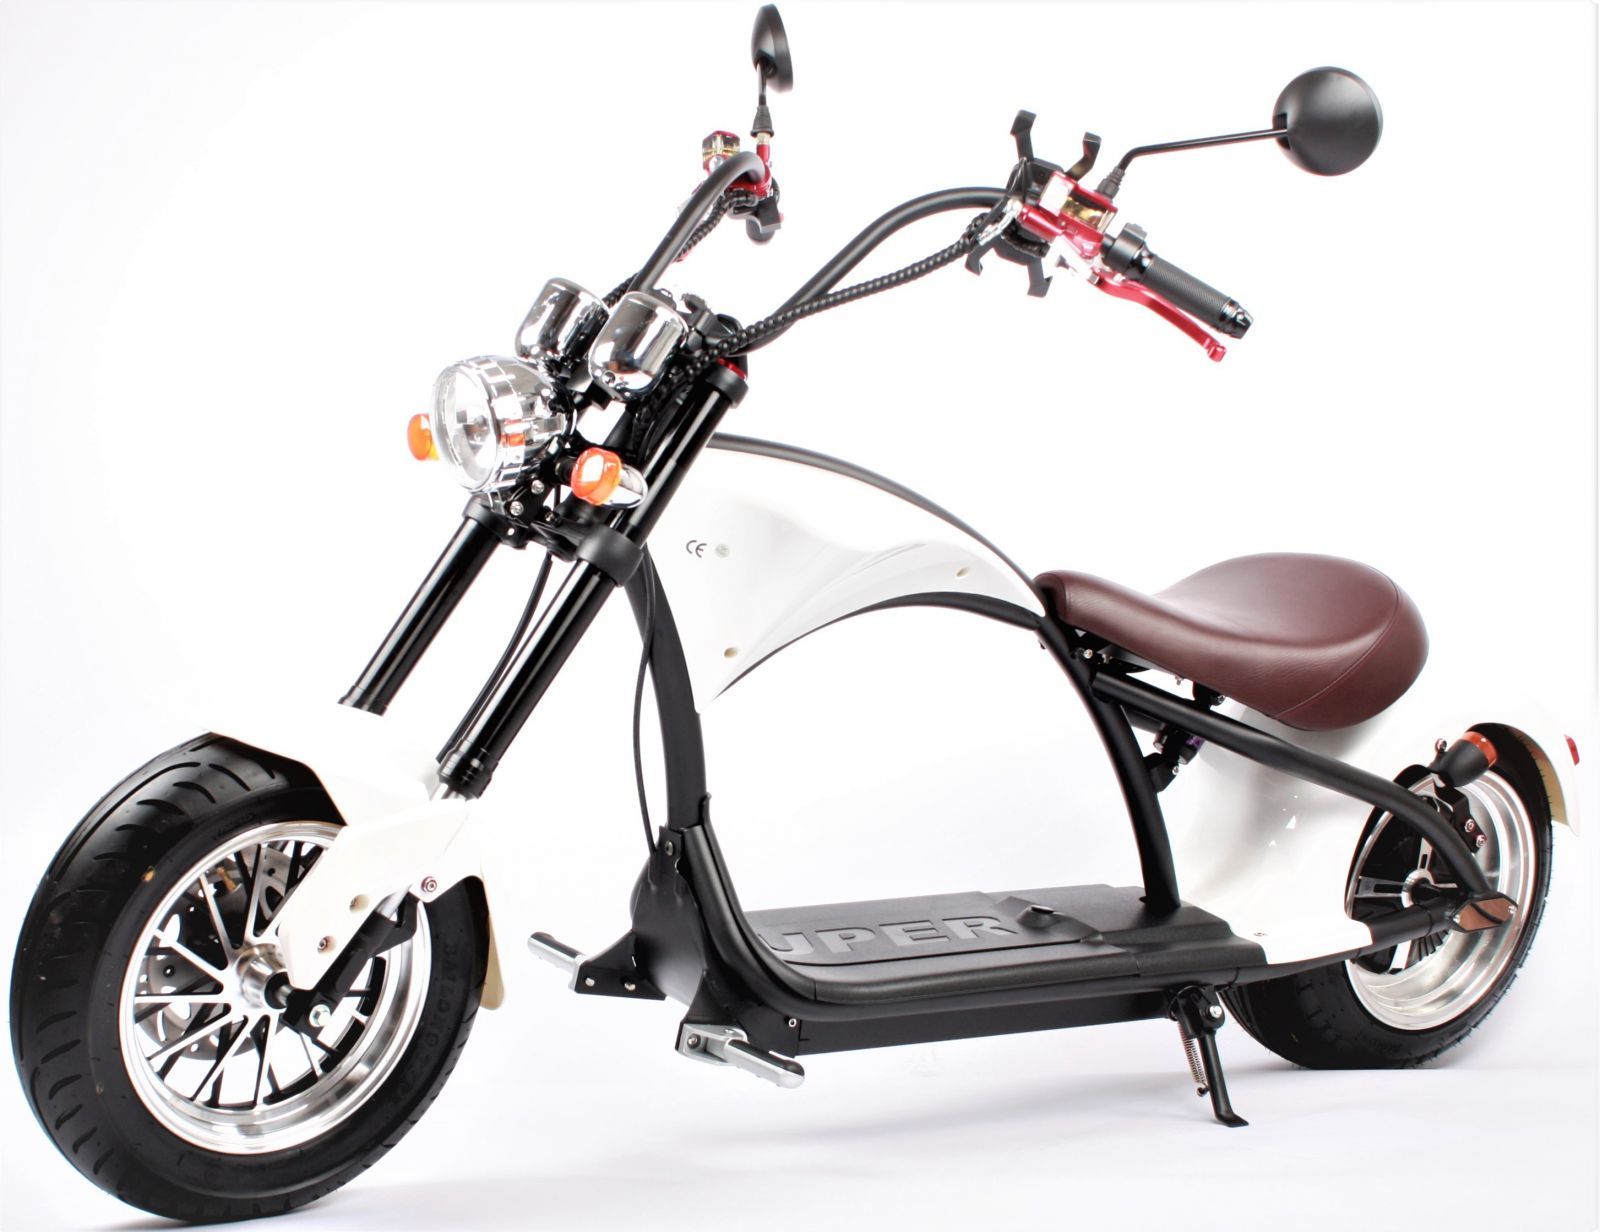 RCskladem SUPER CHOPPER ECO HIGHWAY Electric SCOOTER 2000W 1:1 RTR SCH01white white